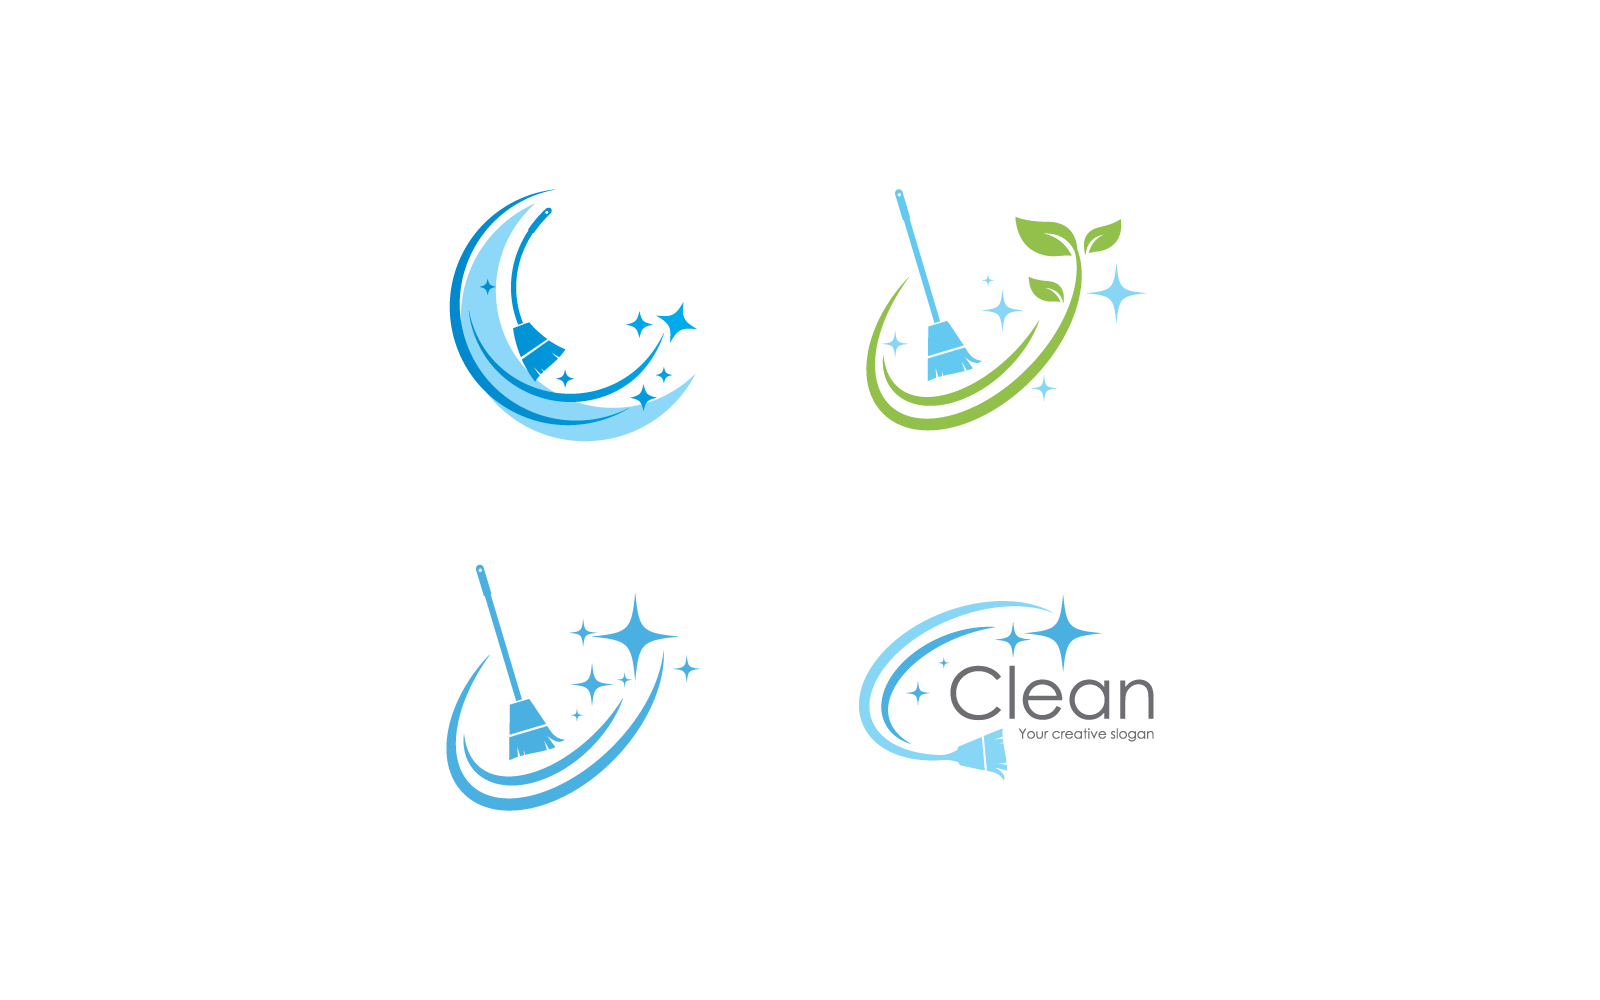 Cleaning logo and symbol design illustration vector template